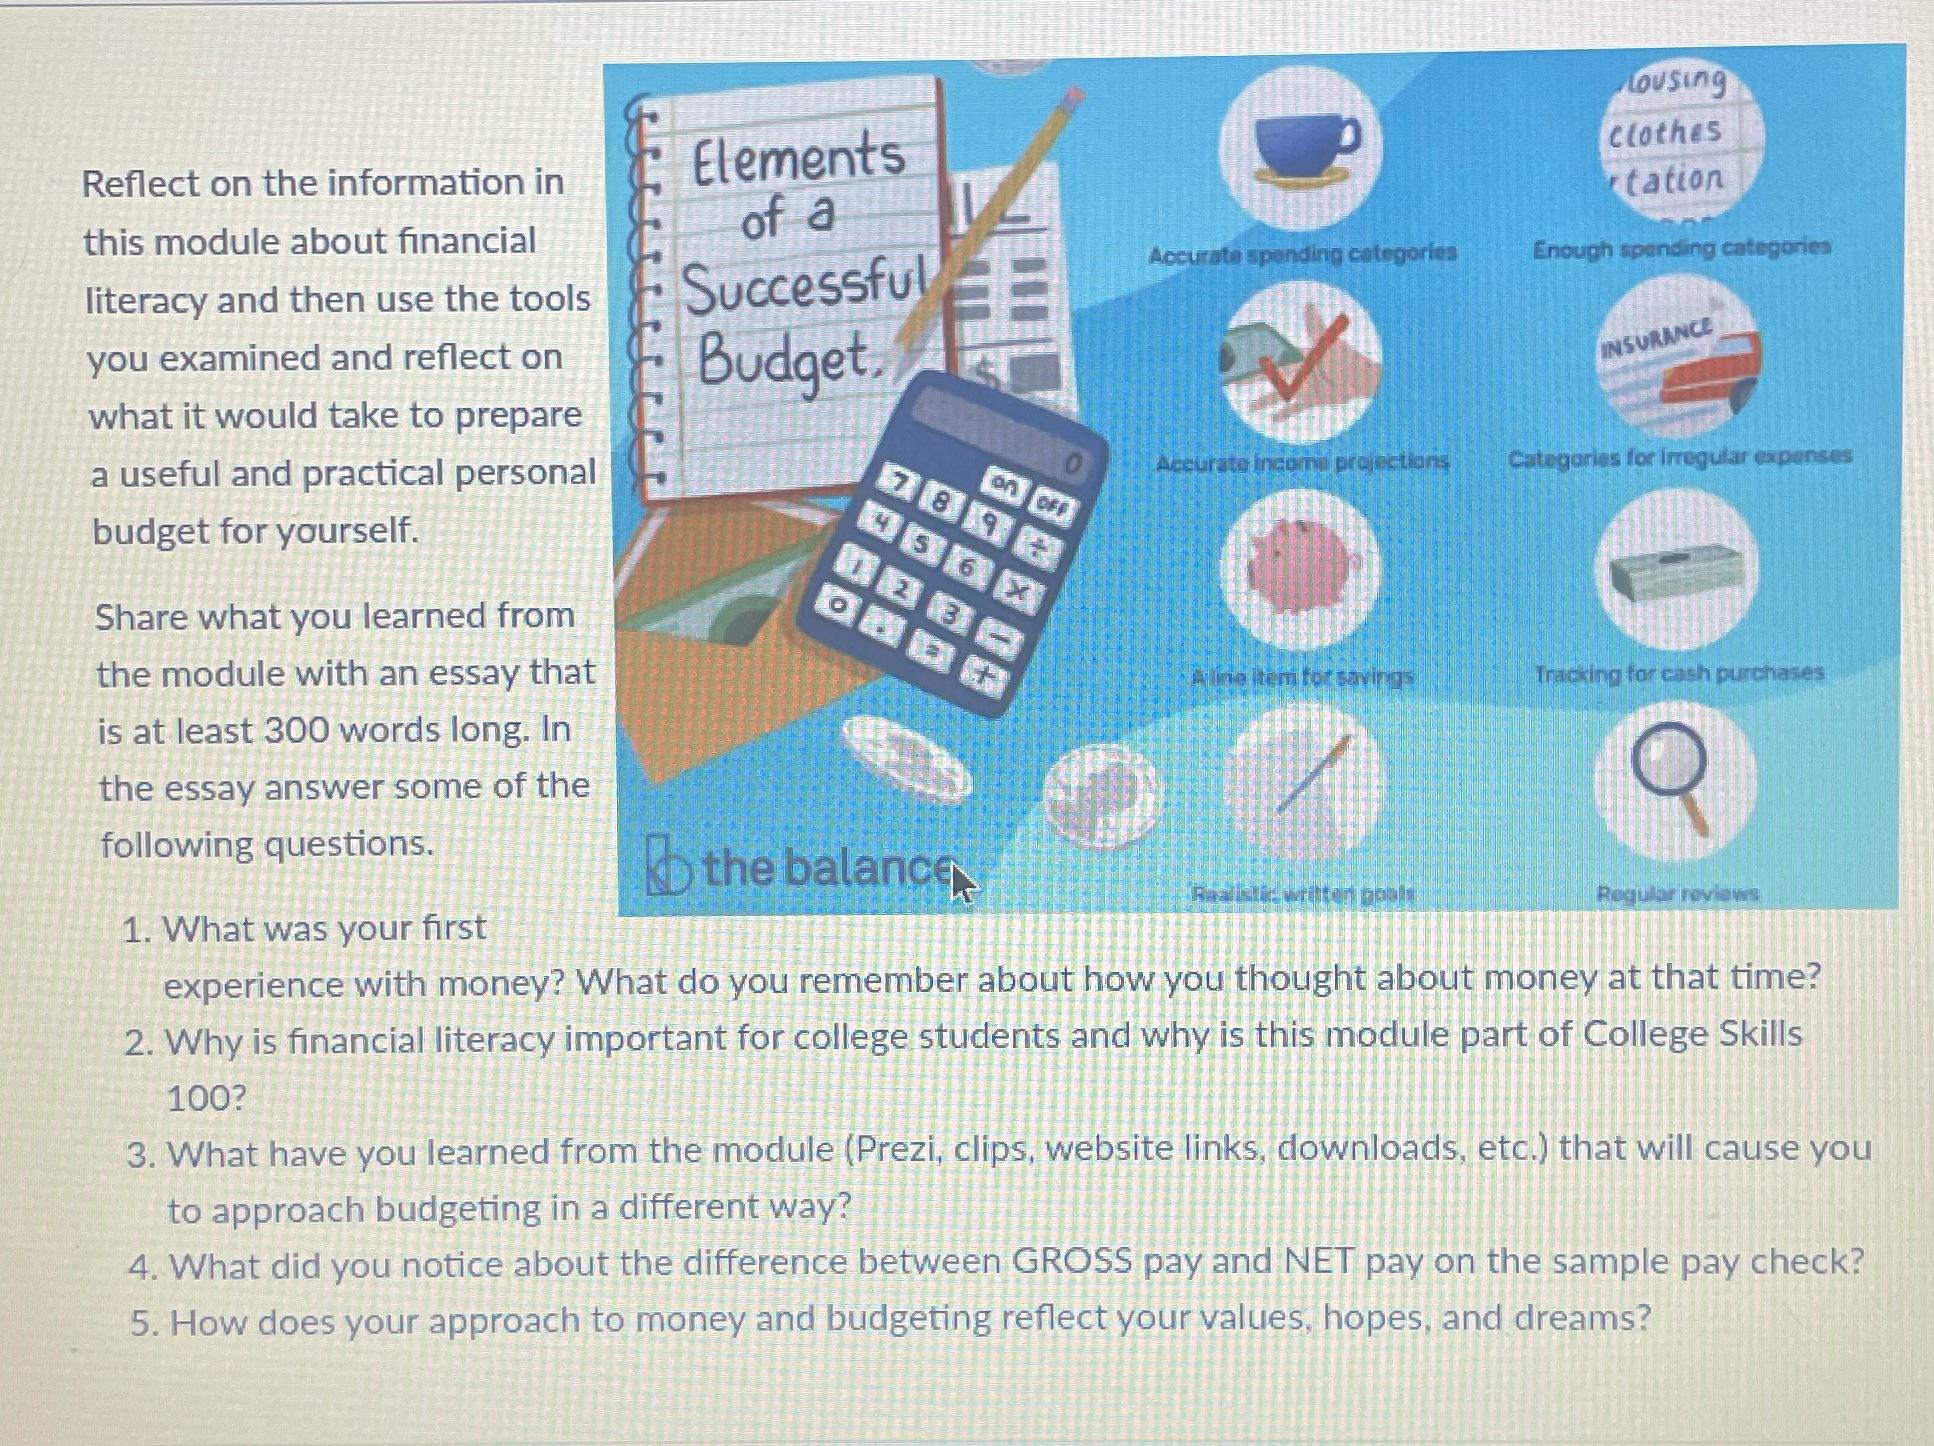 Reflect on the information in this module about financial literacy and then use the tools you examined and